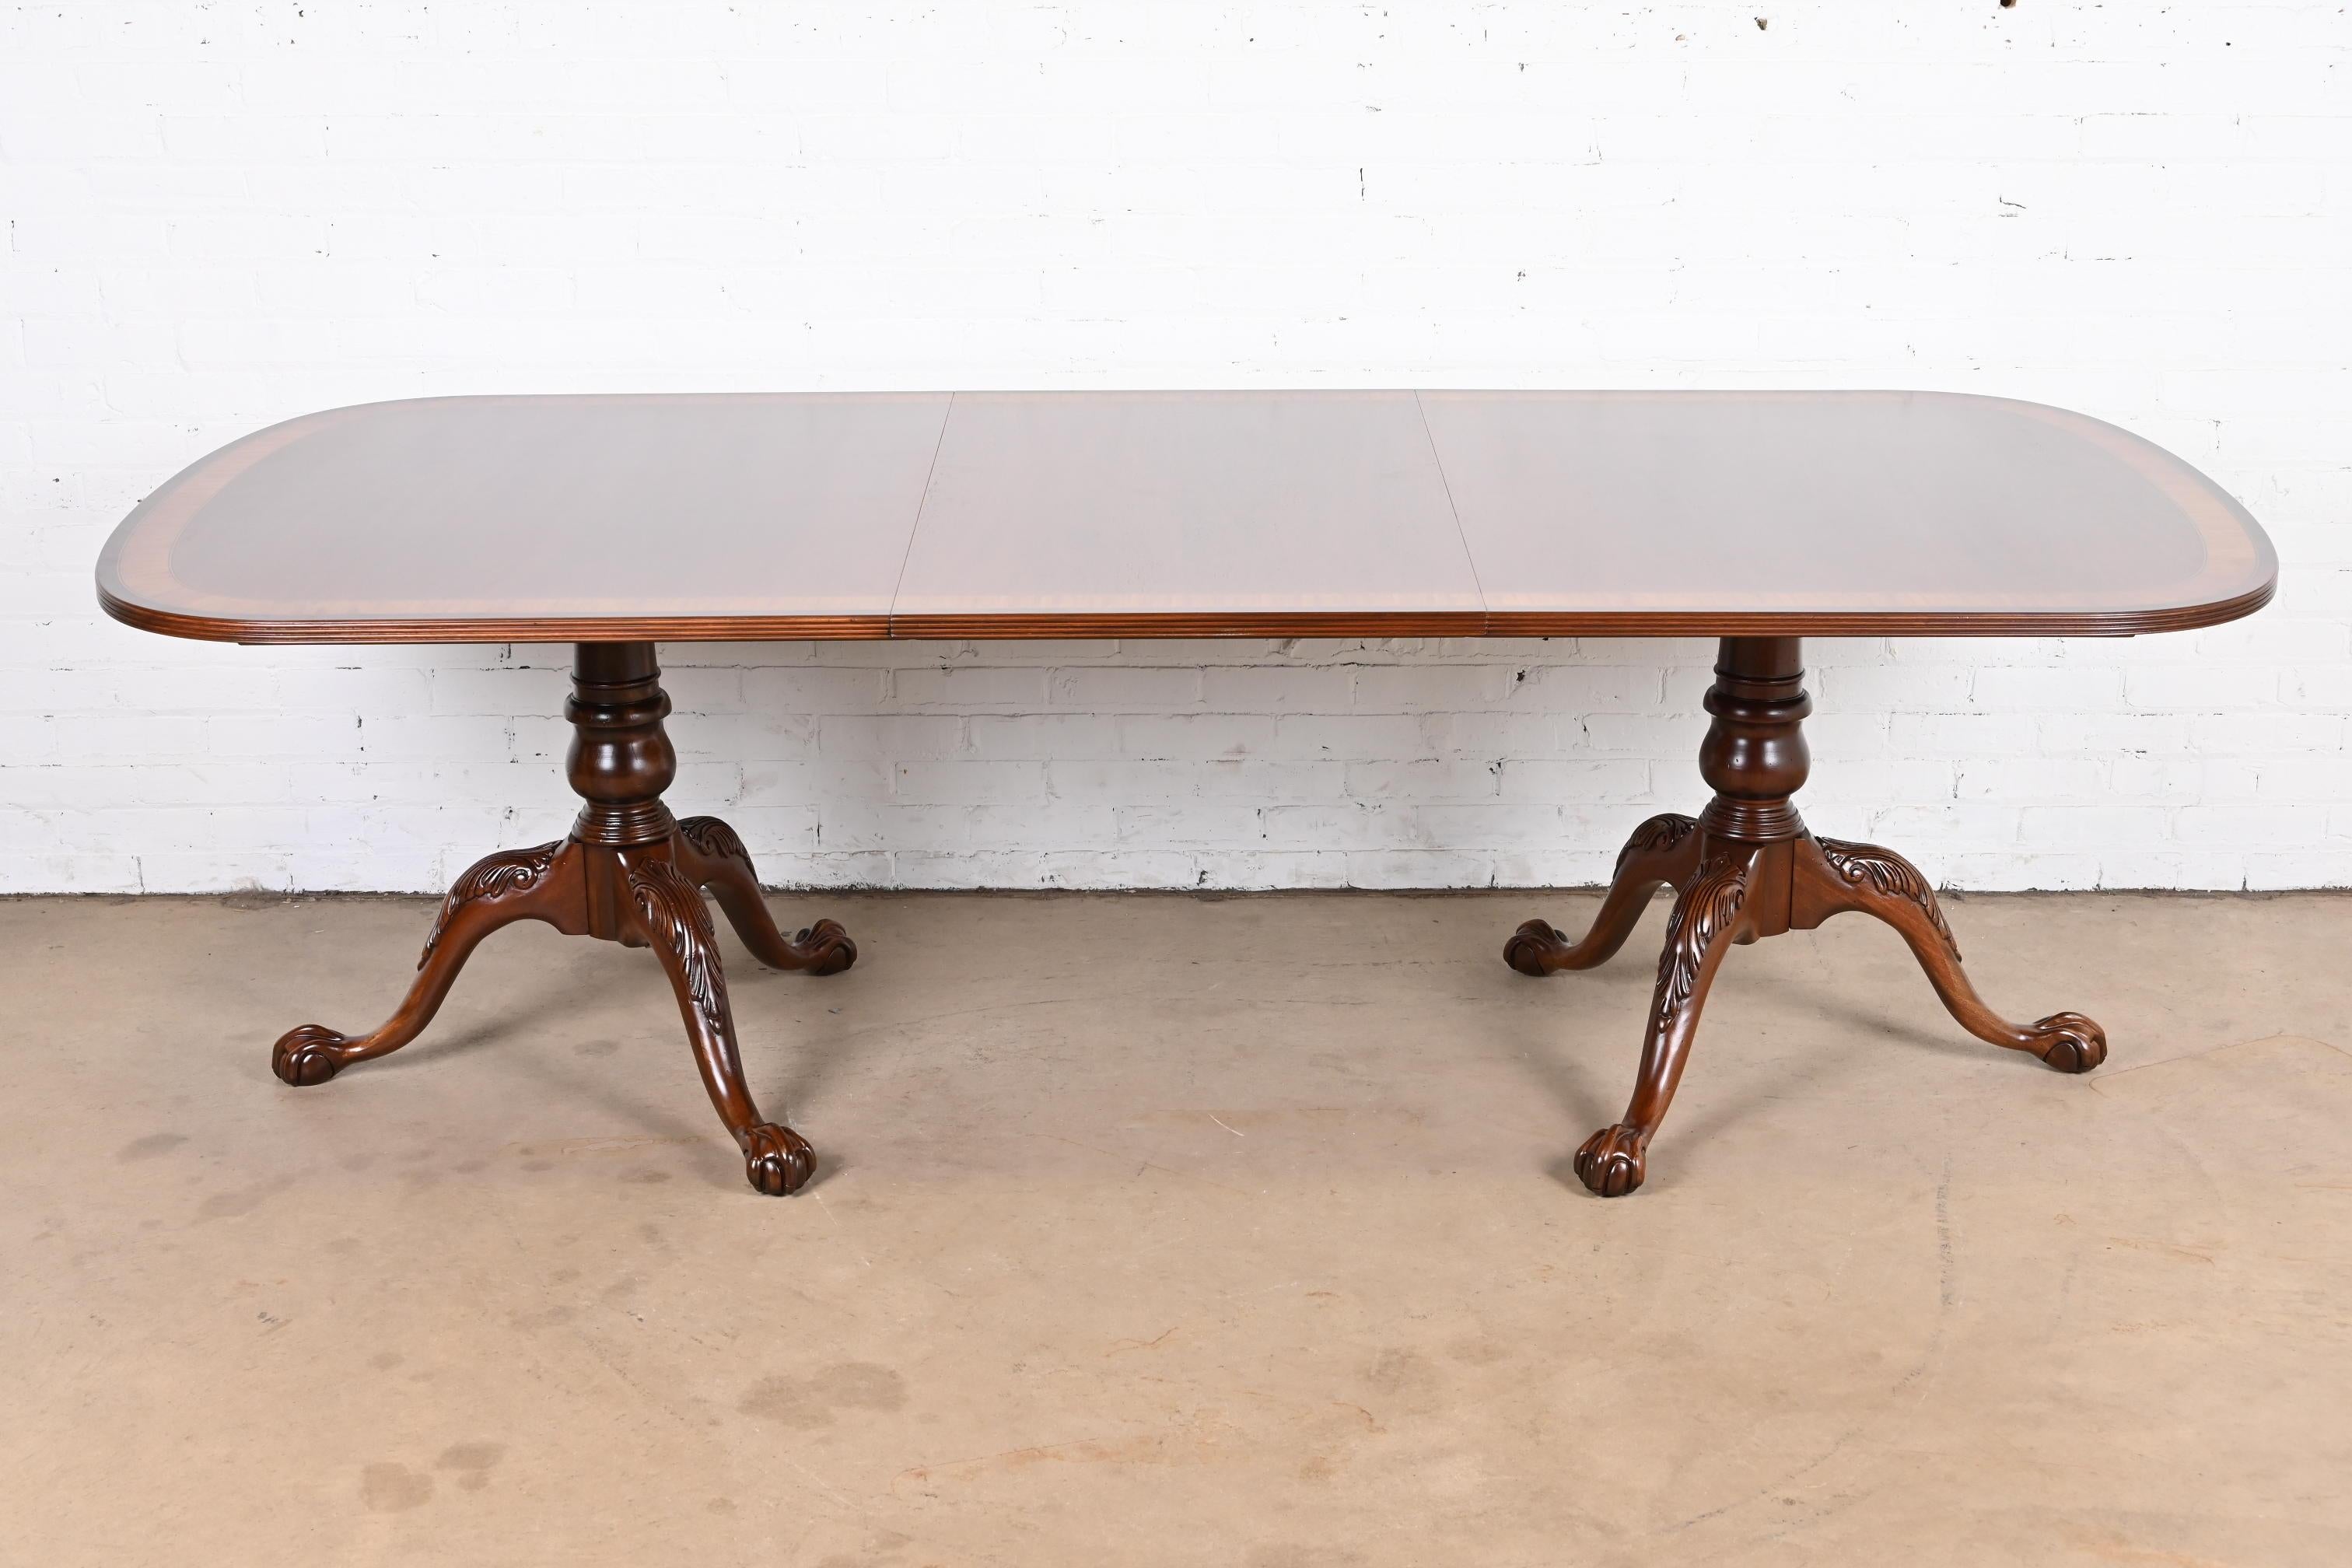 An exceptional Georgian or Chippendale style double pedestal extension dining table

USA, circa Late 20th century

Gorgeous book-matched mahogany, with satinwood banding, and carved solid mahogany pedestals with ball and claw feet.

Measures: 72